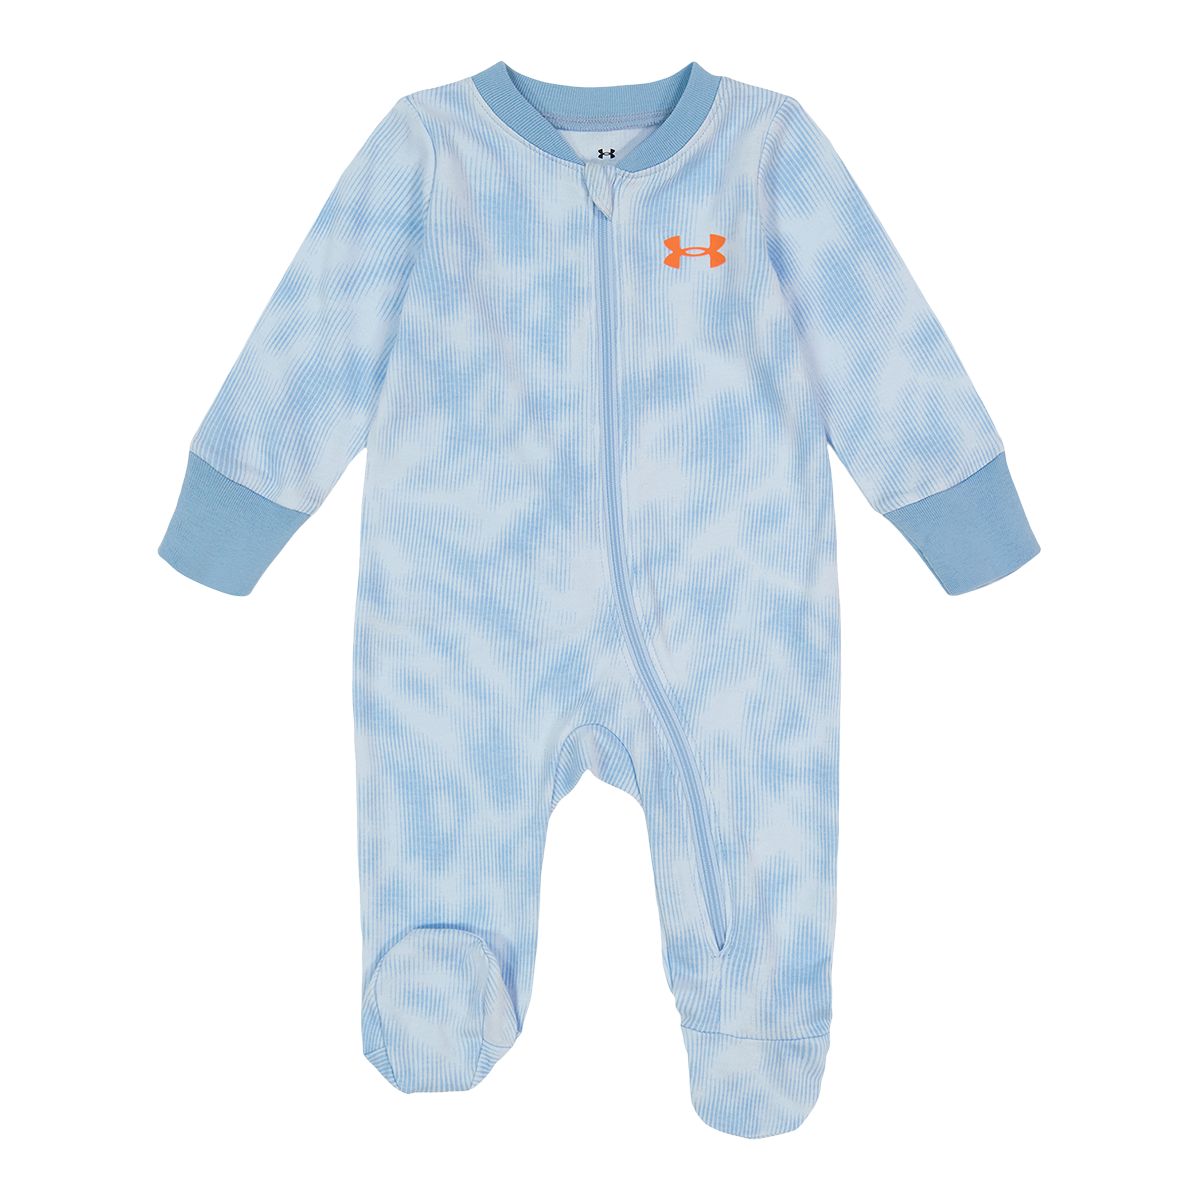 Under Armour Infant Boys' Print Coverall